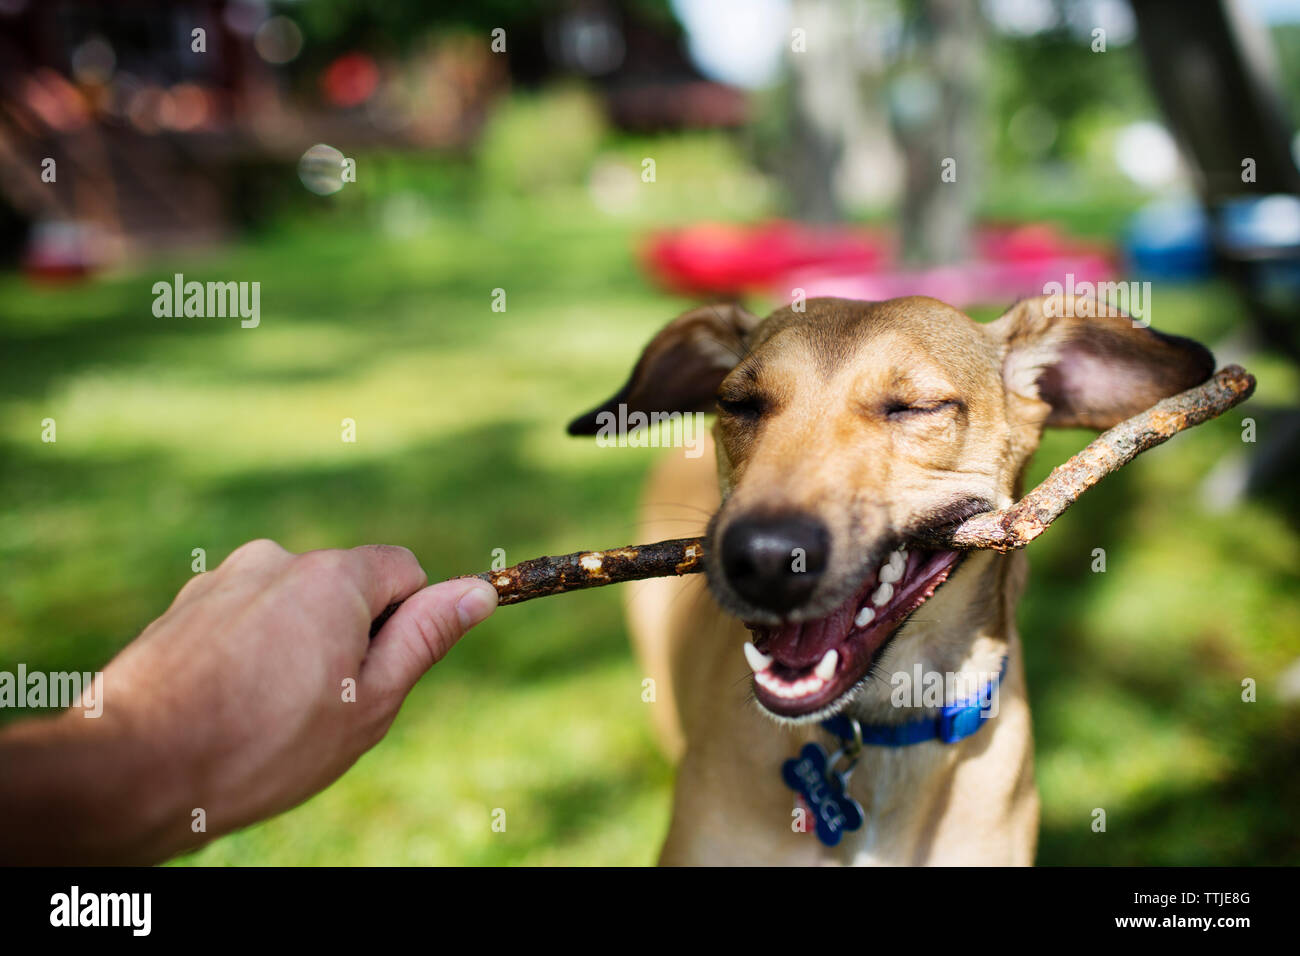 Dog pulling stick from man's hand at park Stock Photo